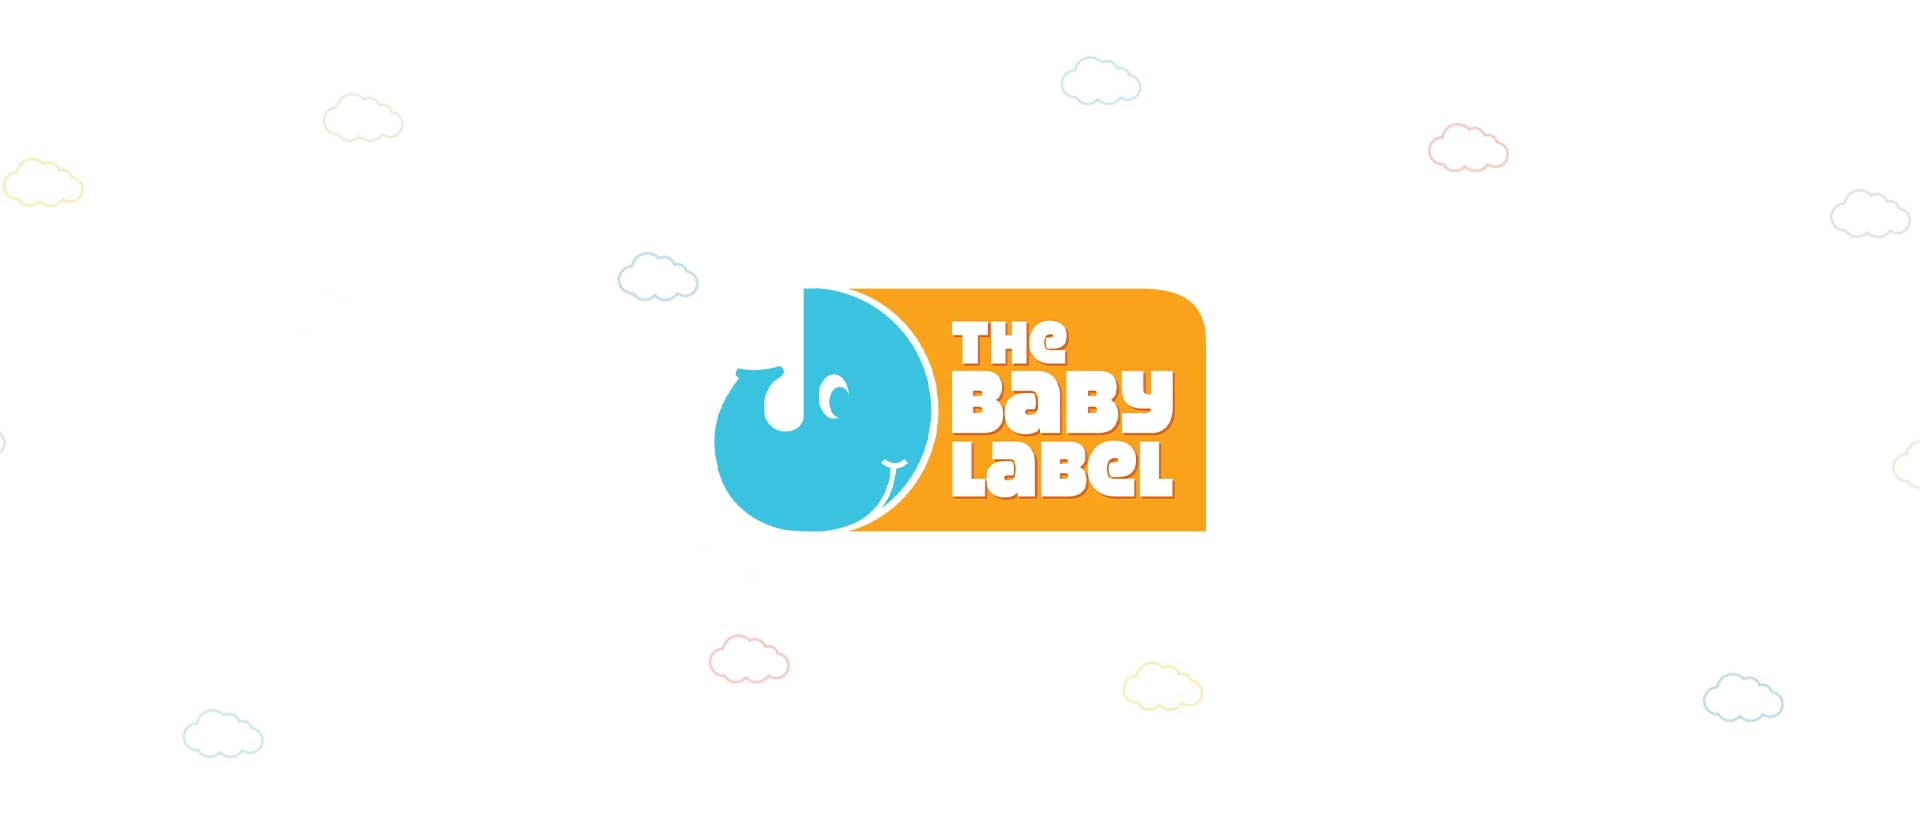 The Baby Label